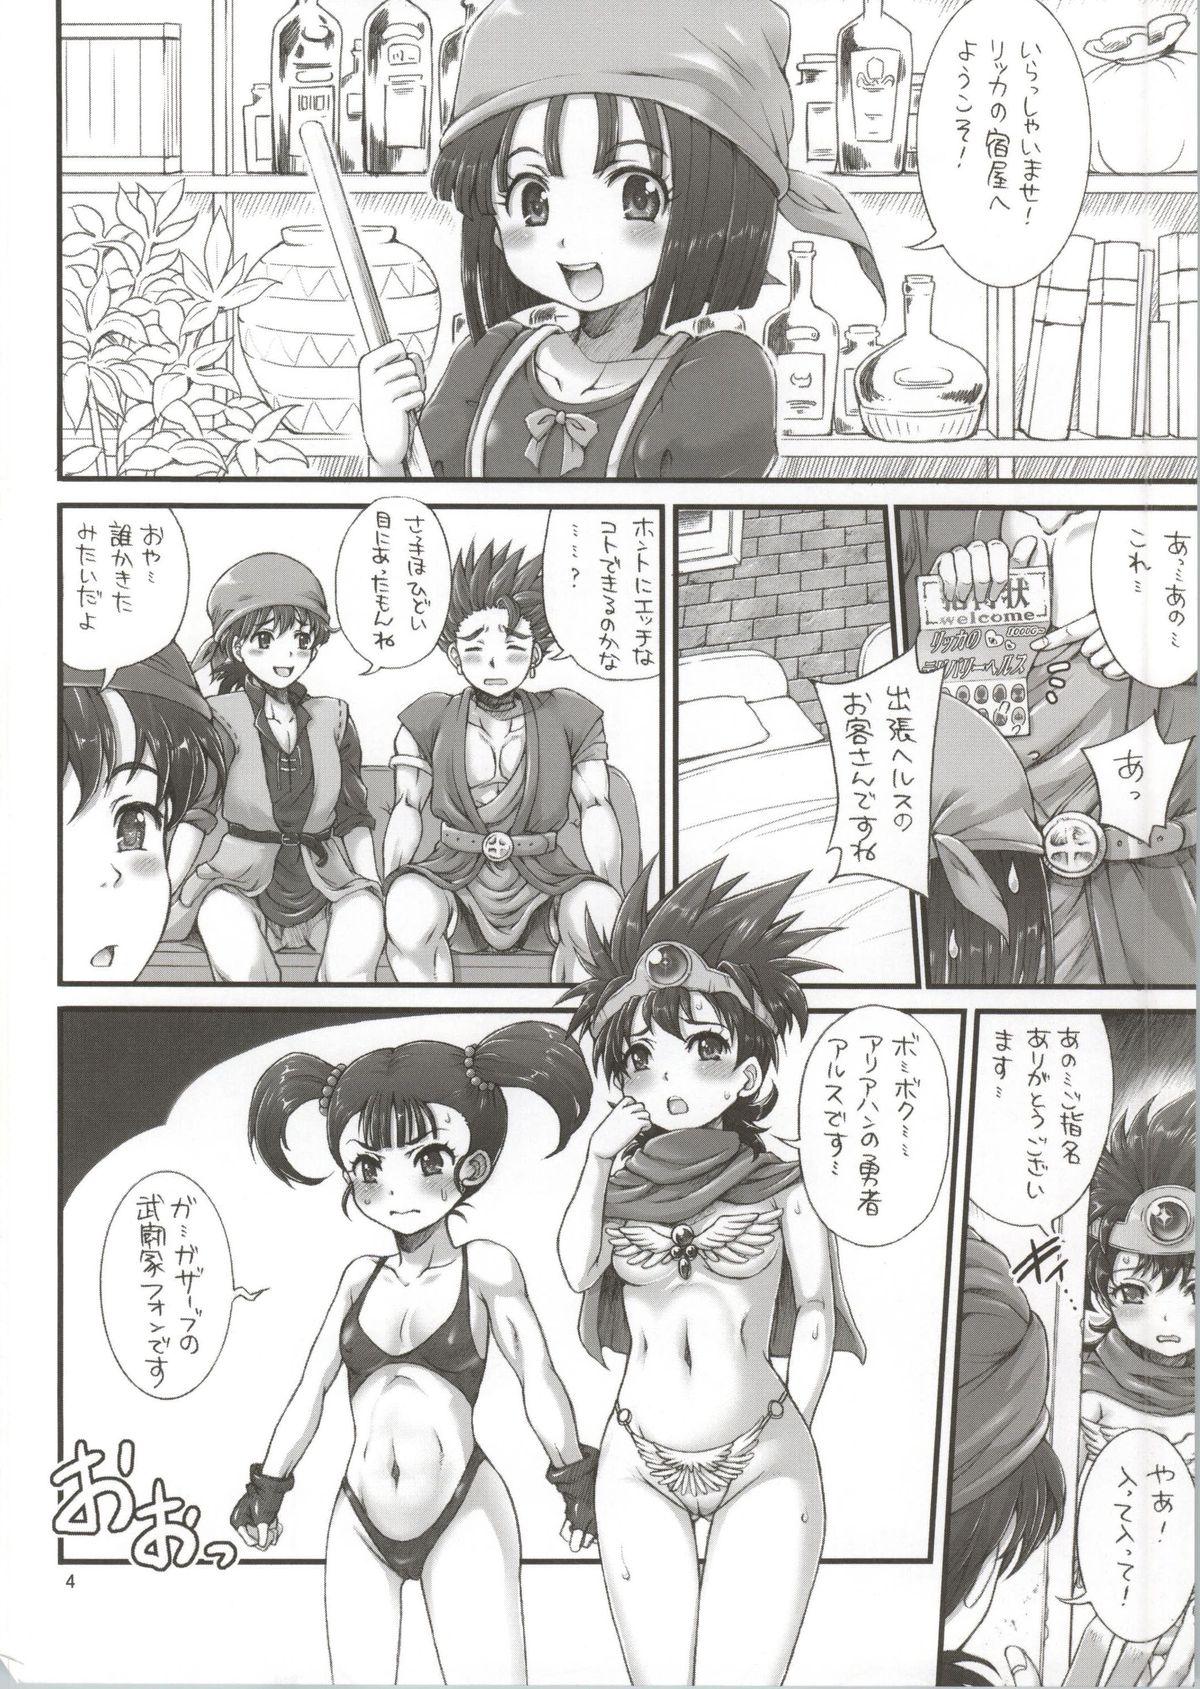 Grosso DQ Delivery Health All Stars - Dragon quest Old - Page 3